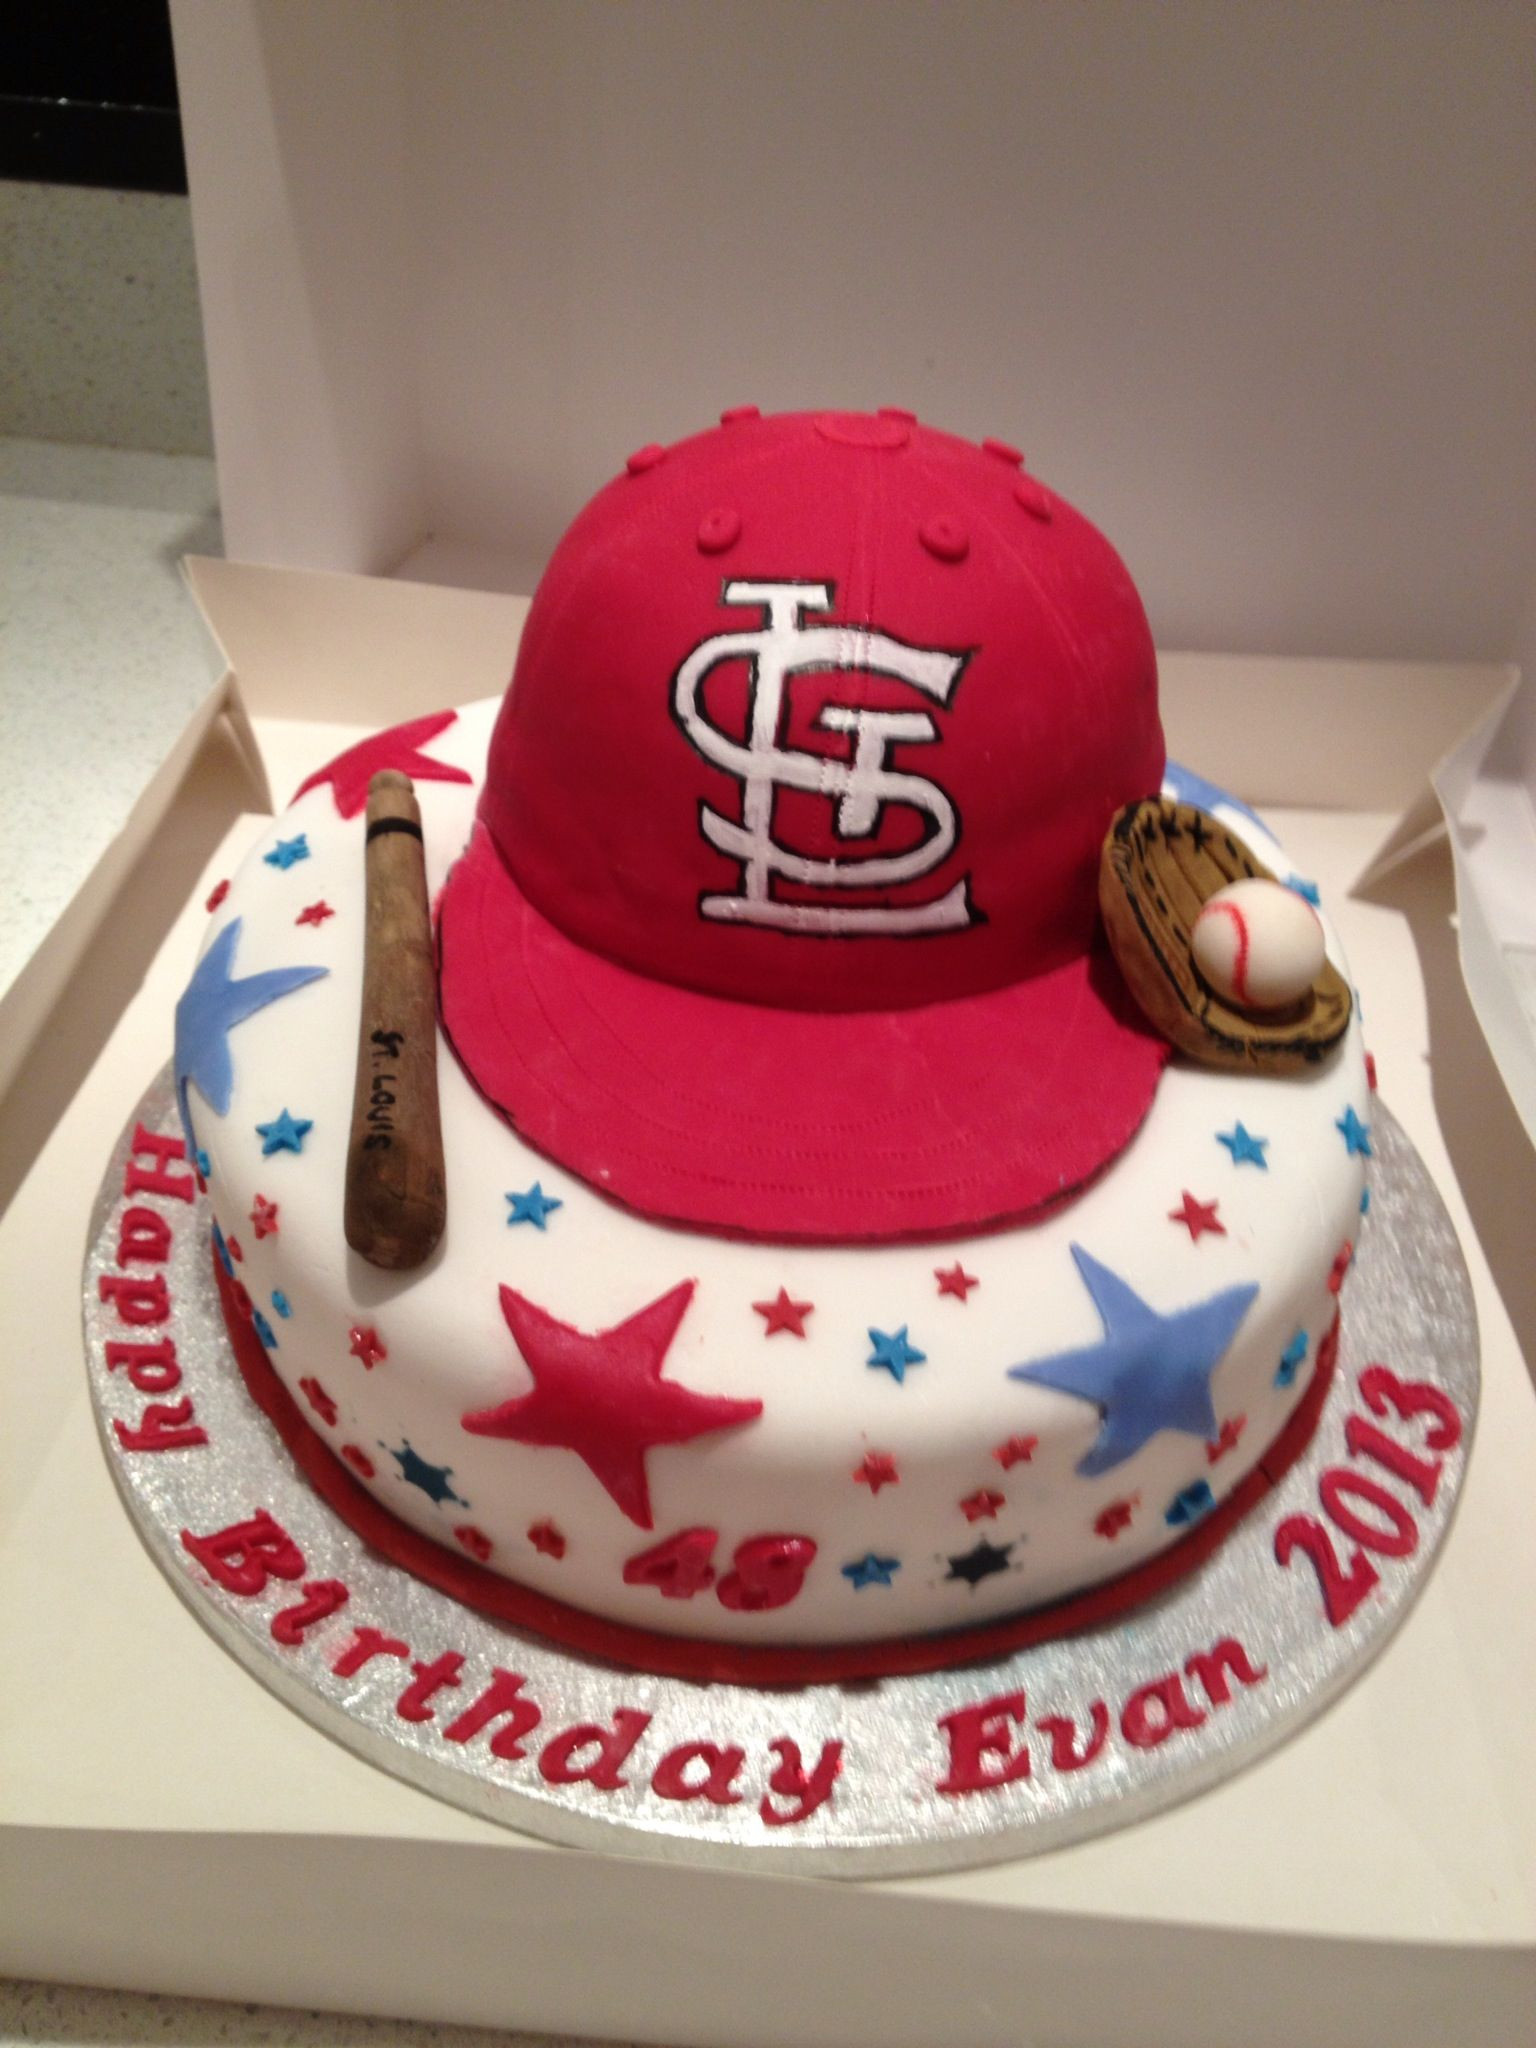 Birthday Party St Louis
 St Louis Cardinals baseball cake